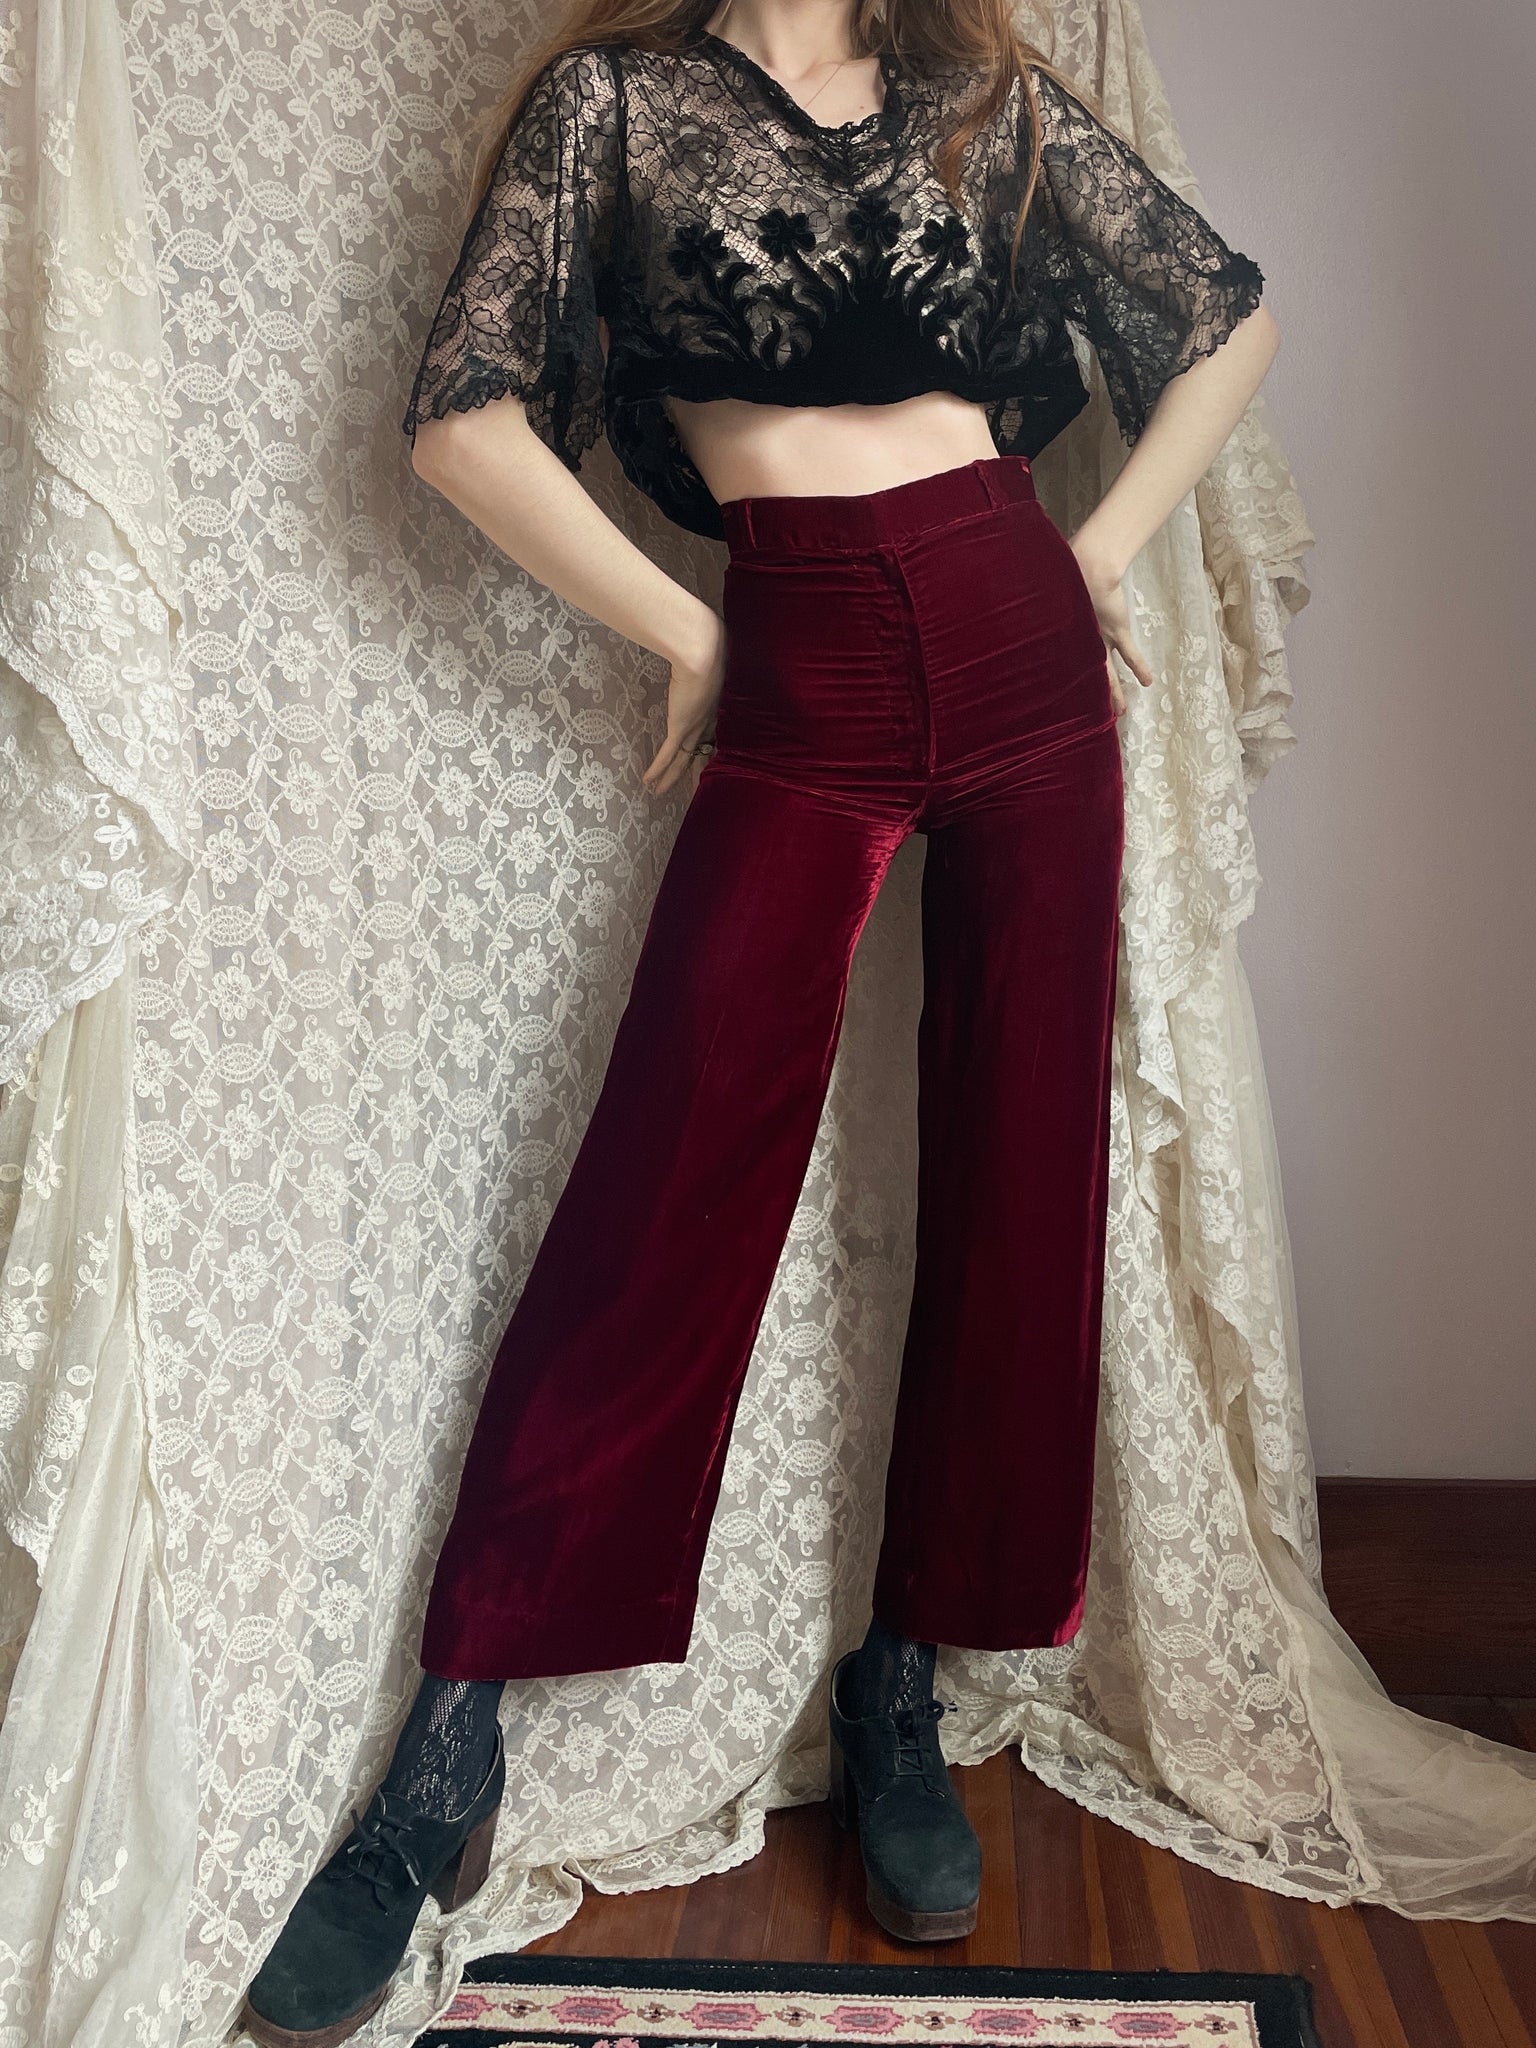 Red Palazzo Pants Outfits. | Outfits, Palazzo pants outfit, Fashion outfits